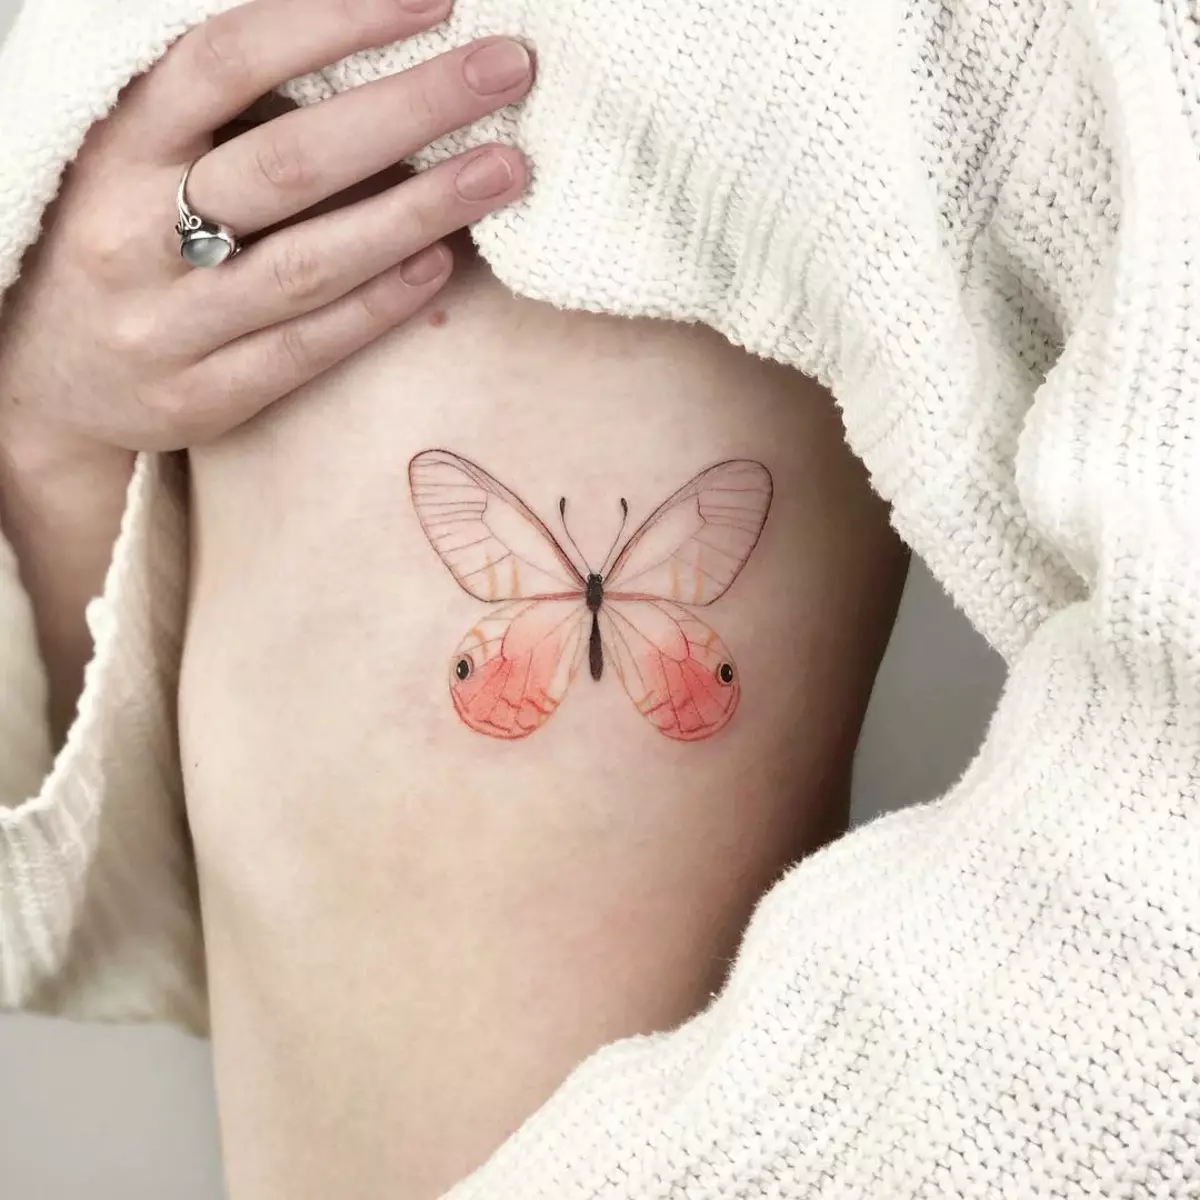 Tender tattoo: sketches for girls. Tattoos on hand and on shoulders, small and large. Gentle flowers and other feminine and sophisticated tattoos 282_4